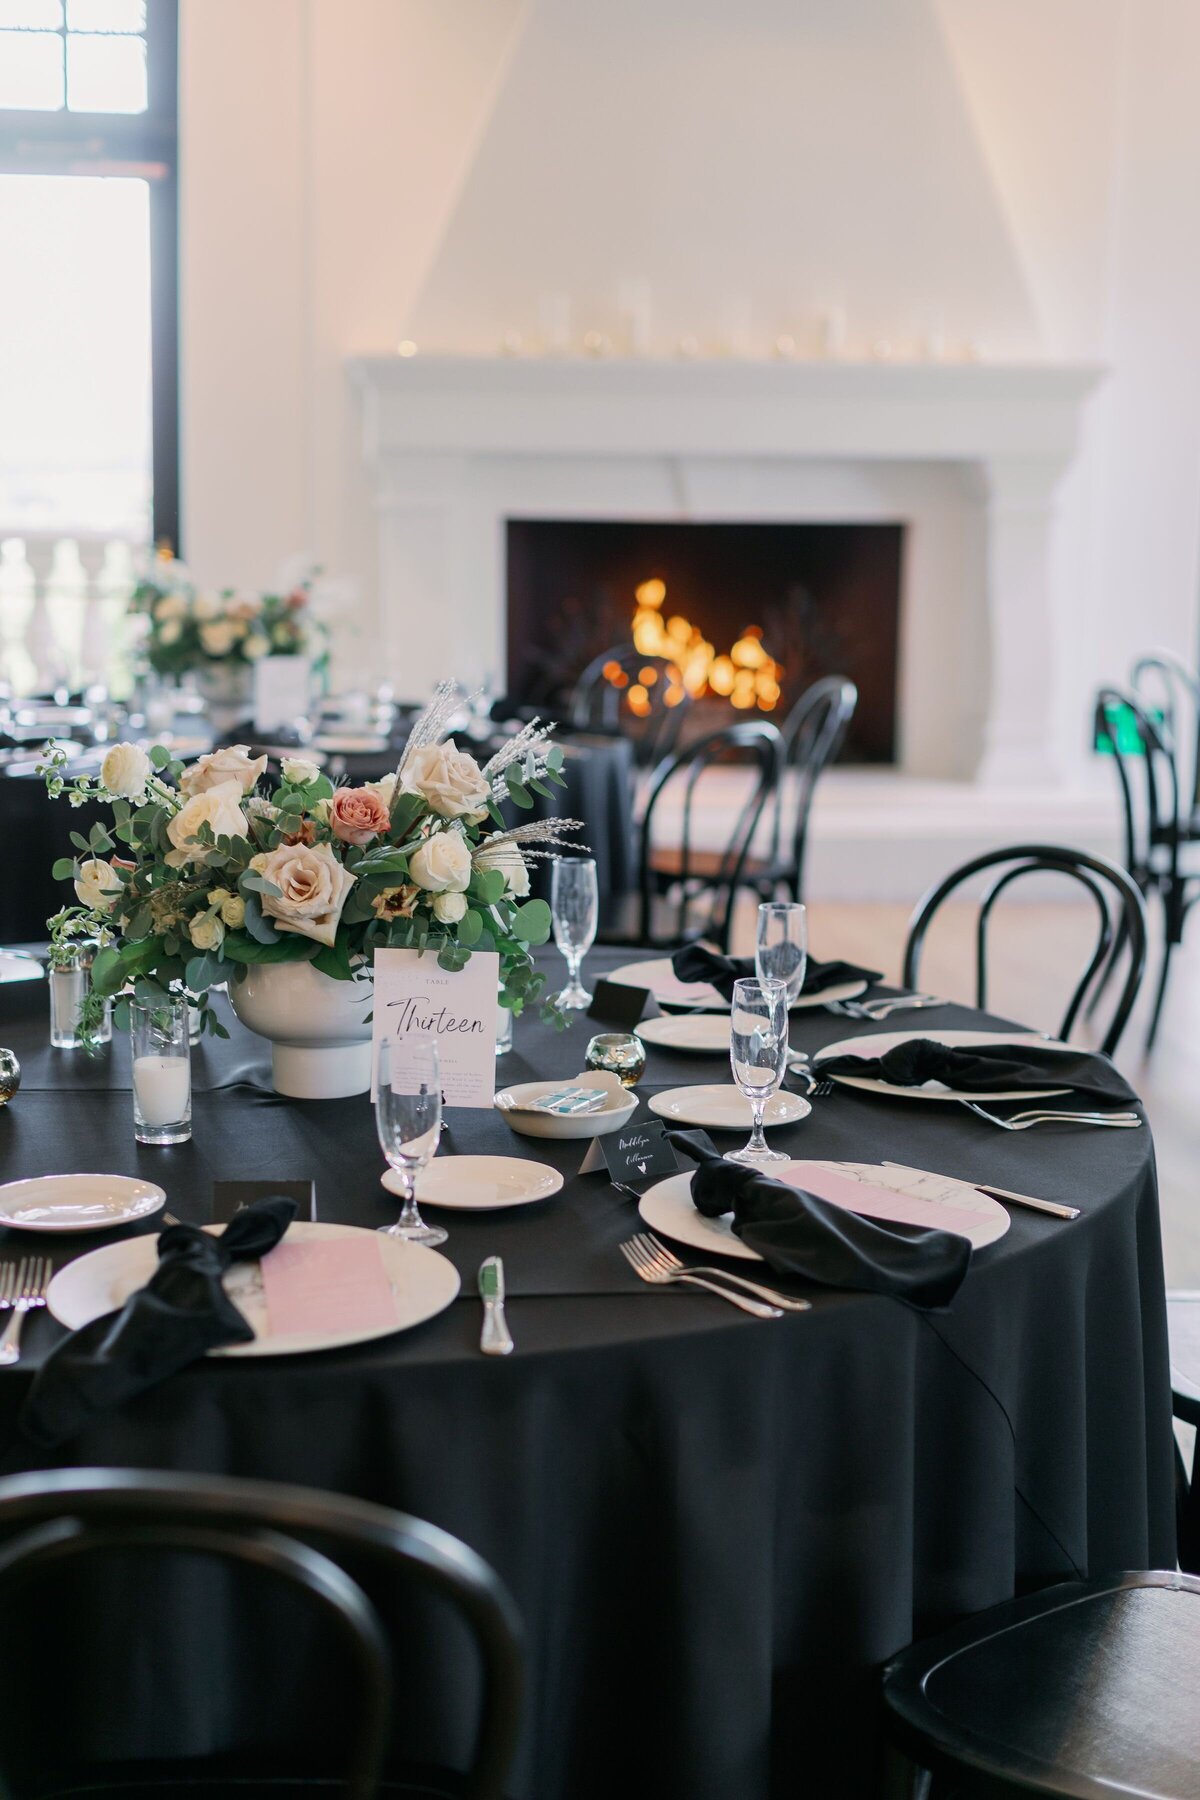 Bouquets with a hint of color sit in the center of each dining table to offset black and white.